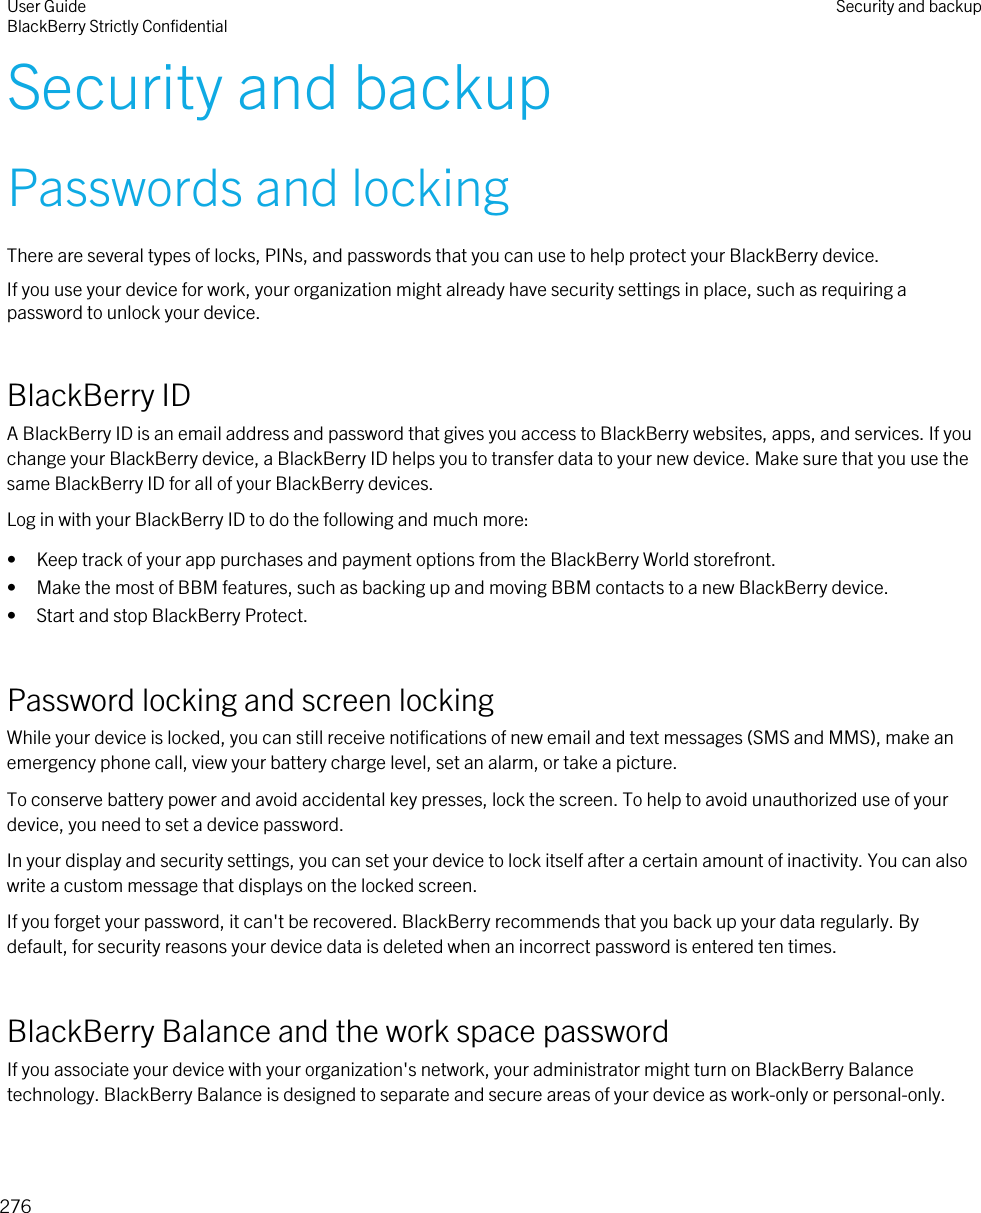 Security and backupPasswords and lockingThere are several types of locks, PINs, and passwords that you can use to help protect your BlackBerry device.If you use your device for work, your organization might already have security settings in place, such as requiring a password to unlock your device.BlackBerry IDA BlackBerry ID is an email address and password that gives you access to BlackBerry websites, apps, and services. If you change your BlackBerry device, a BlackBerry ID helps you to transfer data to your new device. Make sure that you use the same BlackBerry ID for all of your BlackBerry devices.Log in with your BlackBerry ID to do the following and much more:• Keep track of your app purchases and payment options from the BlackBerry World storefront.• Make the most of BBM features, such as backing up and moving BBM contacts to a new BlackBerry device.• Start and stop BlackBerry Protect.Password locking and screen lockingWhile your device is locked, you can still receive notifications of new email and text messages (SMS and MMS), make an emergency phone call, view your battery charge level, set an alarm, or take a picture.To conserve battery power and avoid accidental key presses, lock the screen. To help to avoid unauthorized use of your device, you need to set a device password.In your display and security settings, you can set your device to lock itself after a certain amount of inactivity. You can also write a custom message that displays on the locked screen.If you forget your password, it can&apos;t be recovered. BlackBerry recommends that you back up your data regularly. By default, for security reasons your device data is deleted when an incorrect password is entered ten times.BlackBerry Balance and the work space passwordIf you associate your device with your organization&apos;s network, your administrator might turn on BlackBerry Balance technology. BlackBerry Balance is designed to separate and secure areas of your device as work-only or personal-only.User GuideBlackBerry Strictly Confidential Security and backup276